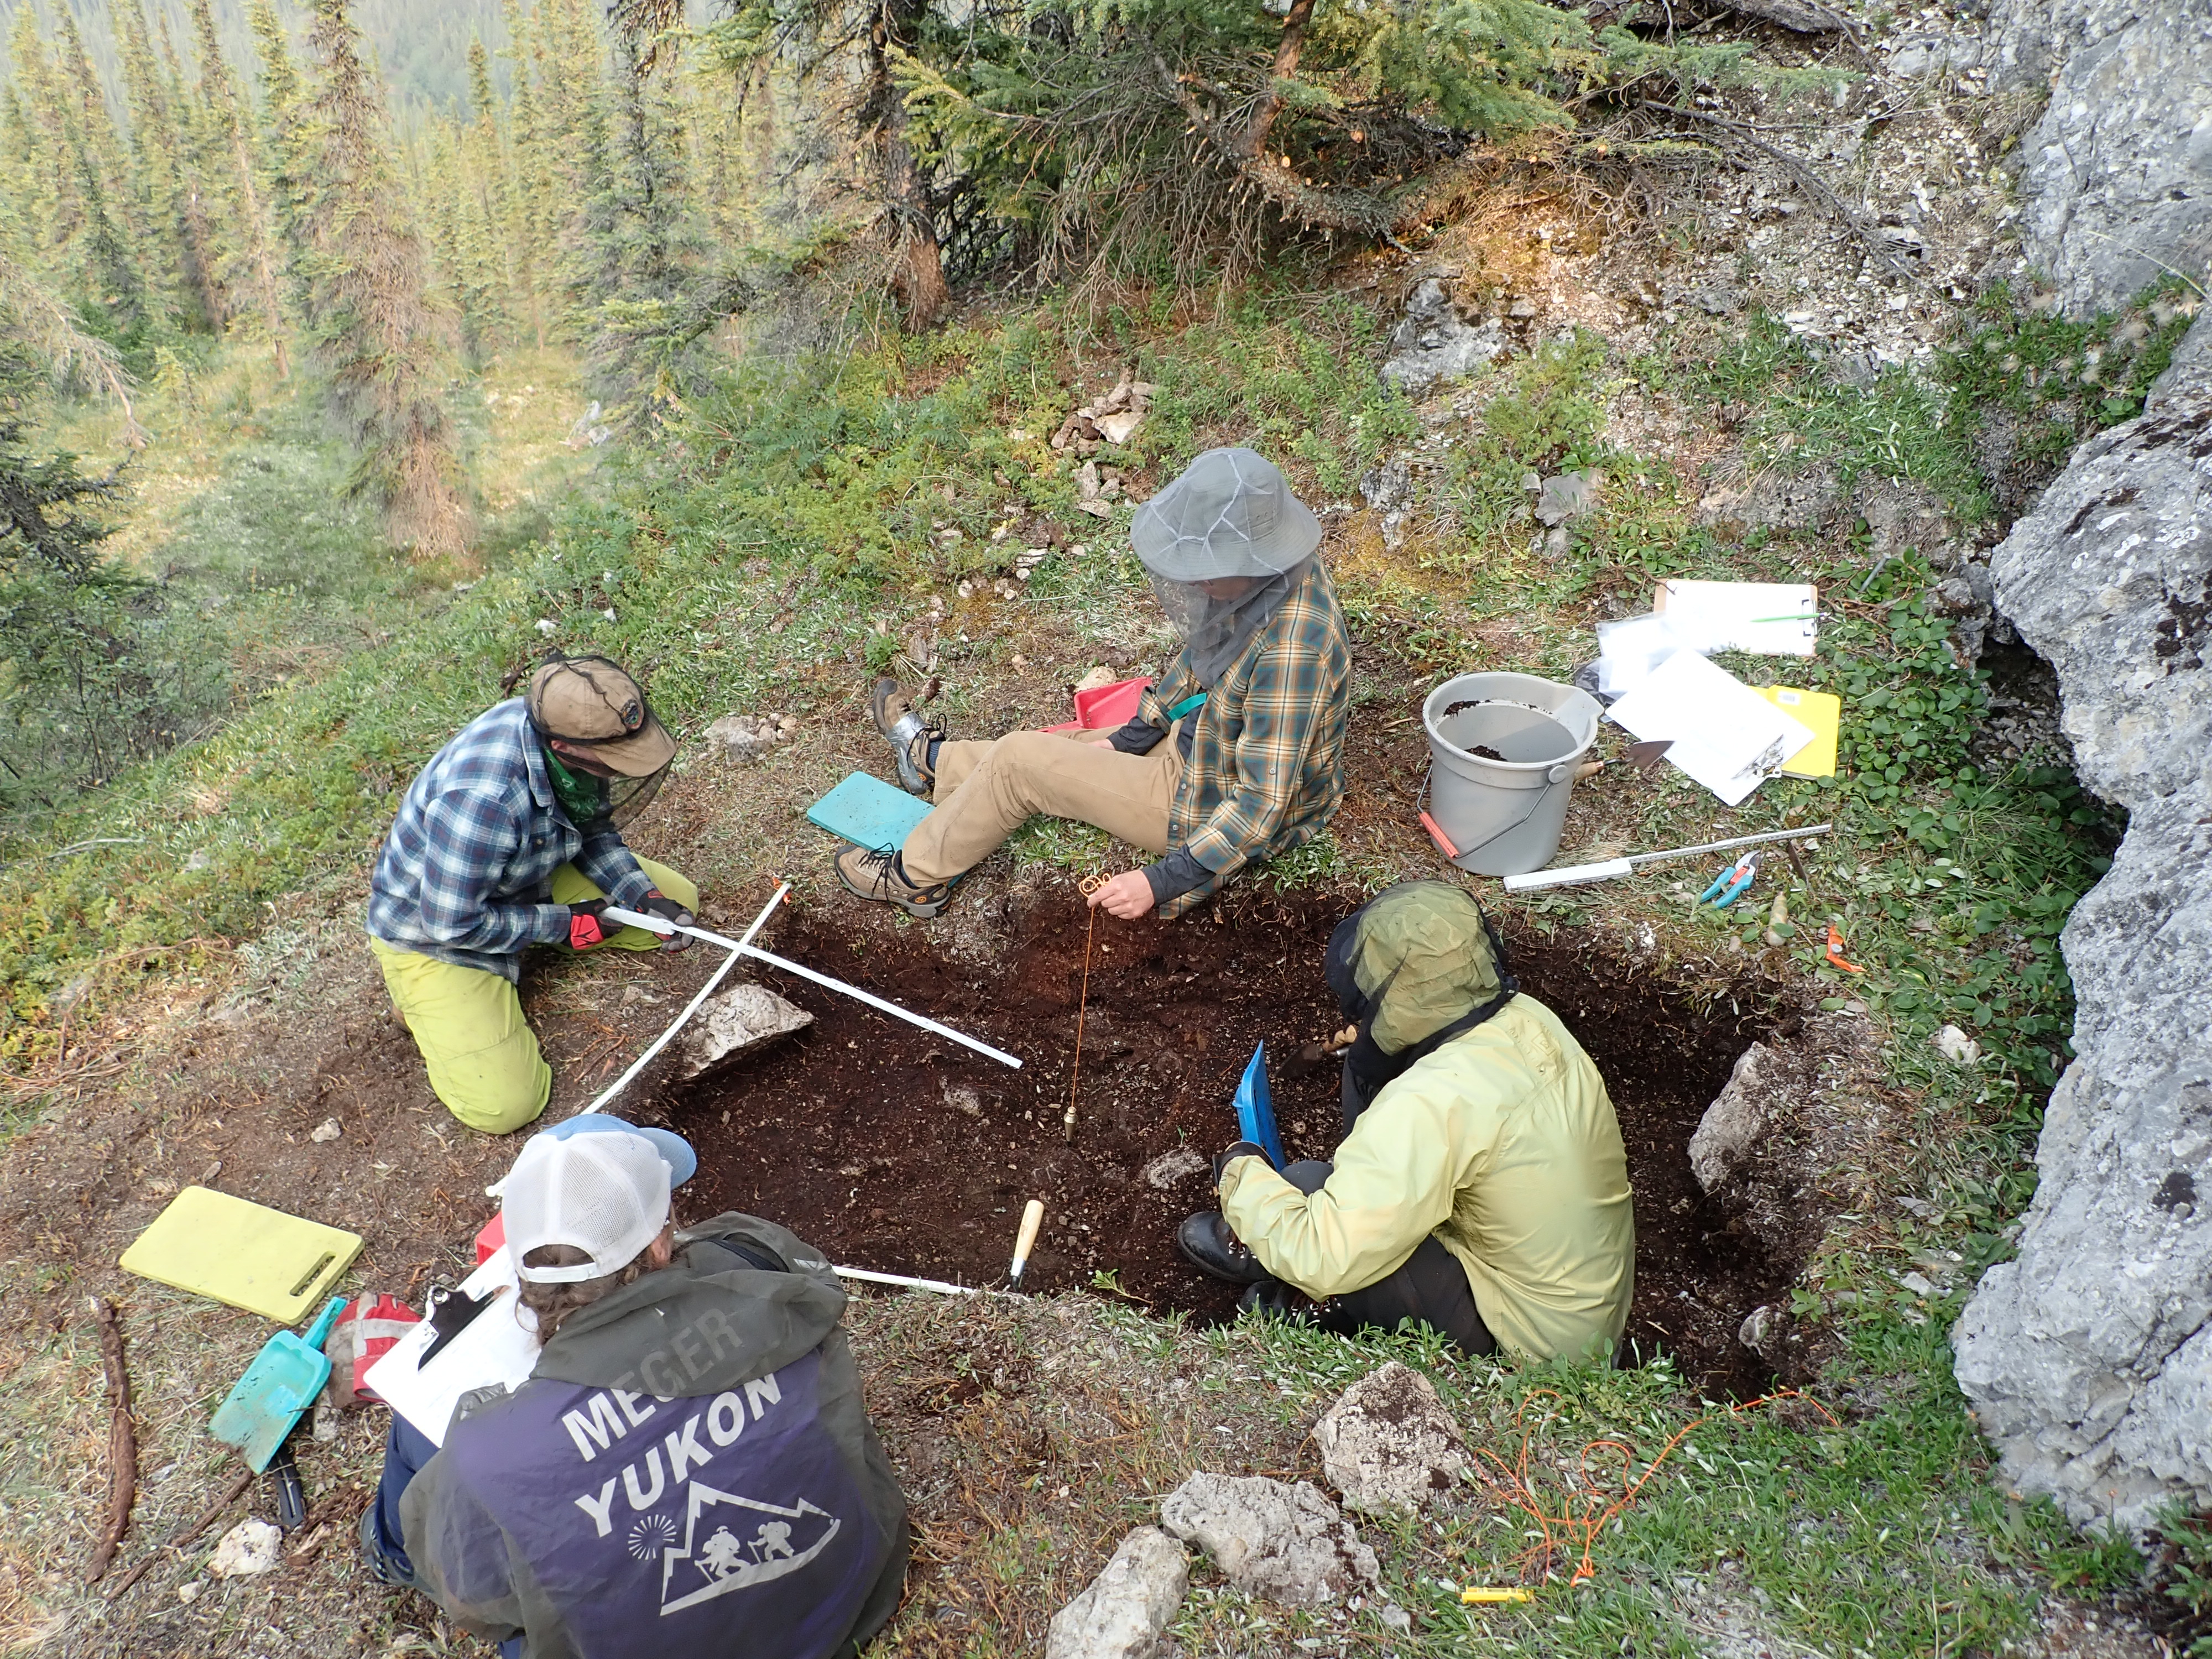 "KU Odyssey research team excavates at the Bluefish Caves archaeological site in the Yukon territory of Canada."